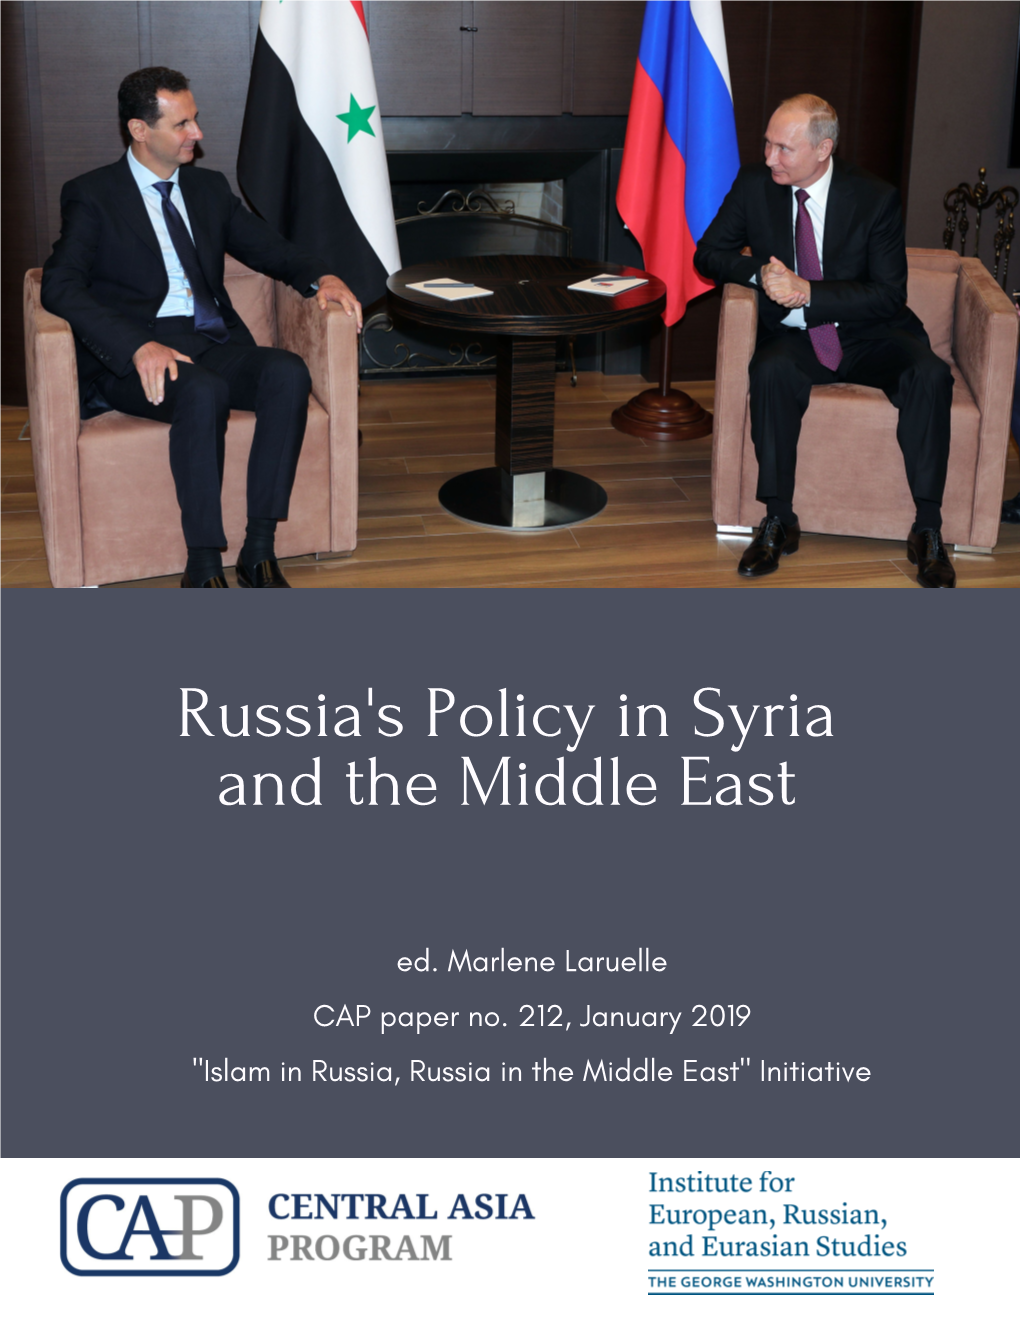 Russia's Policy in Syria and the Middle East